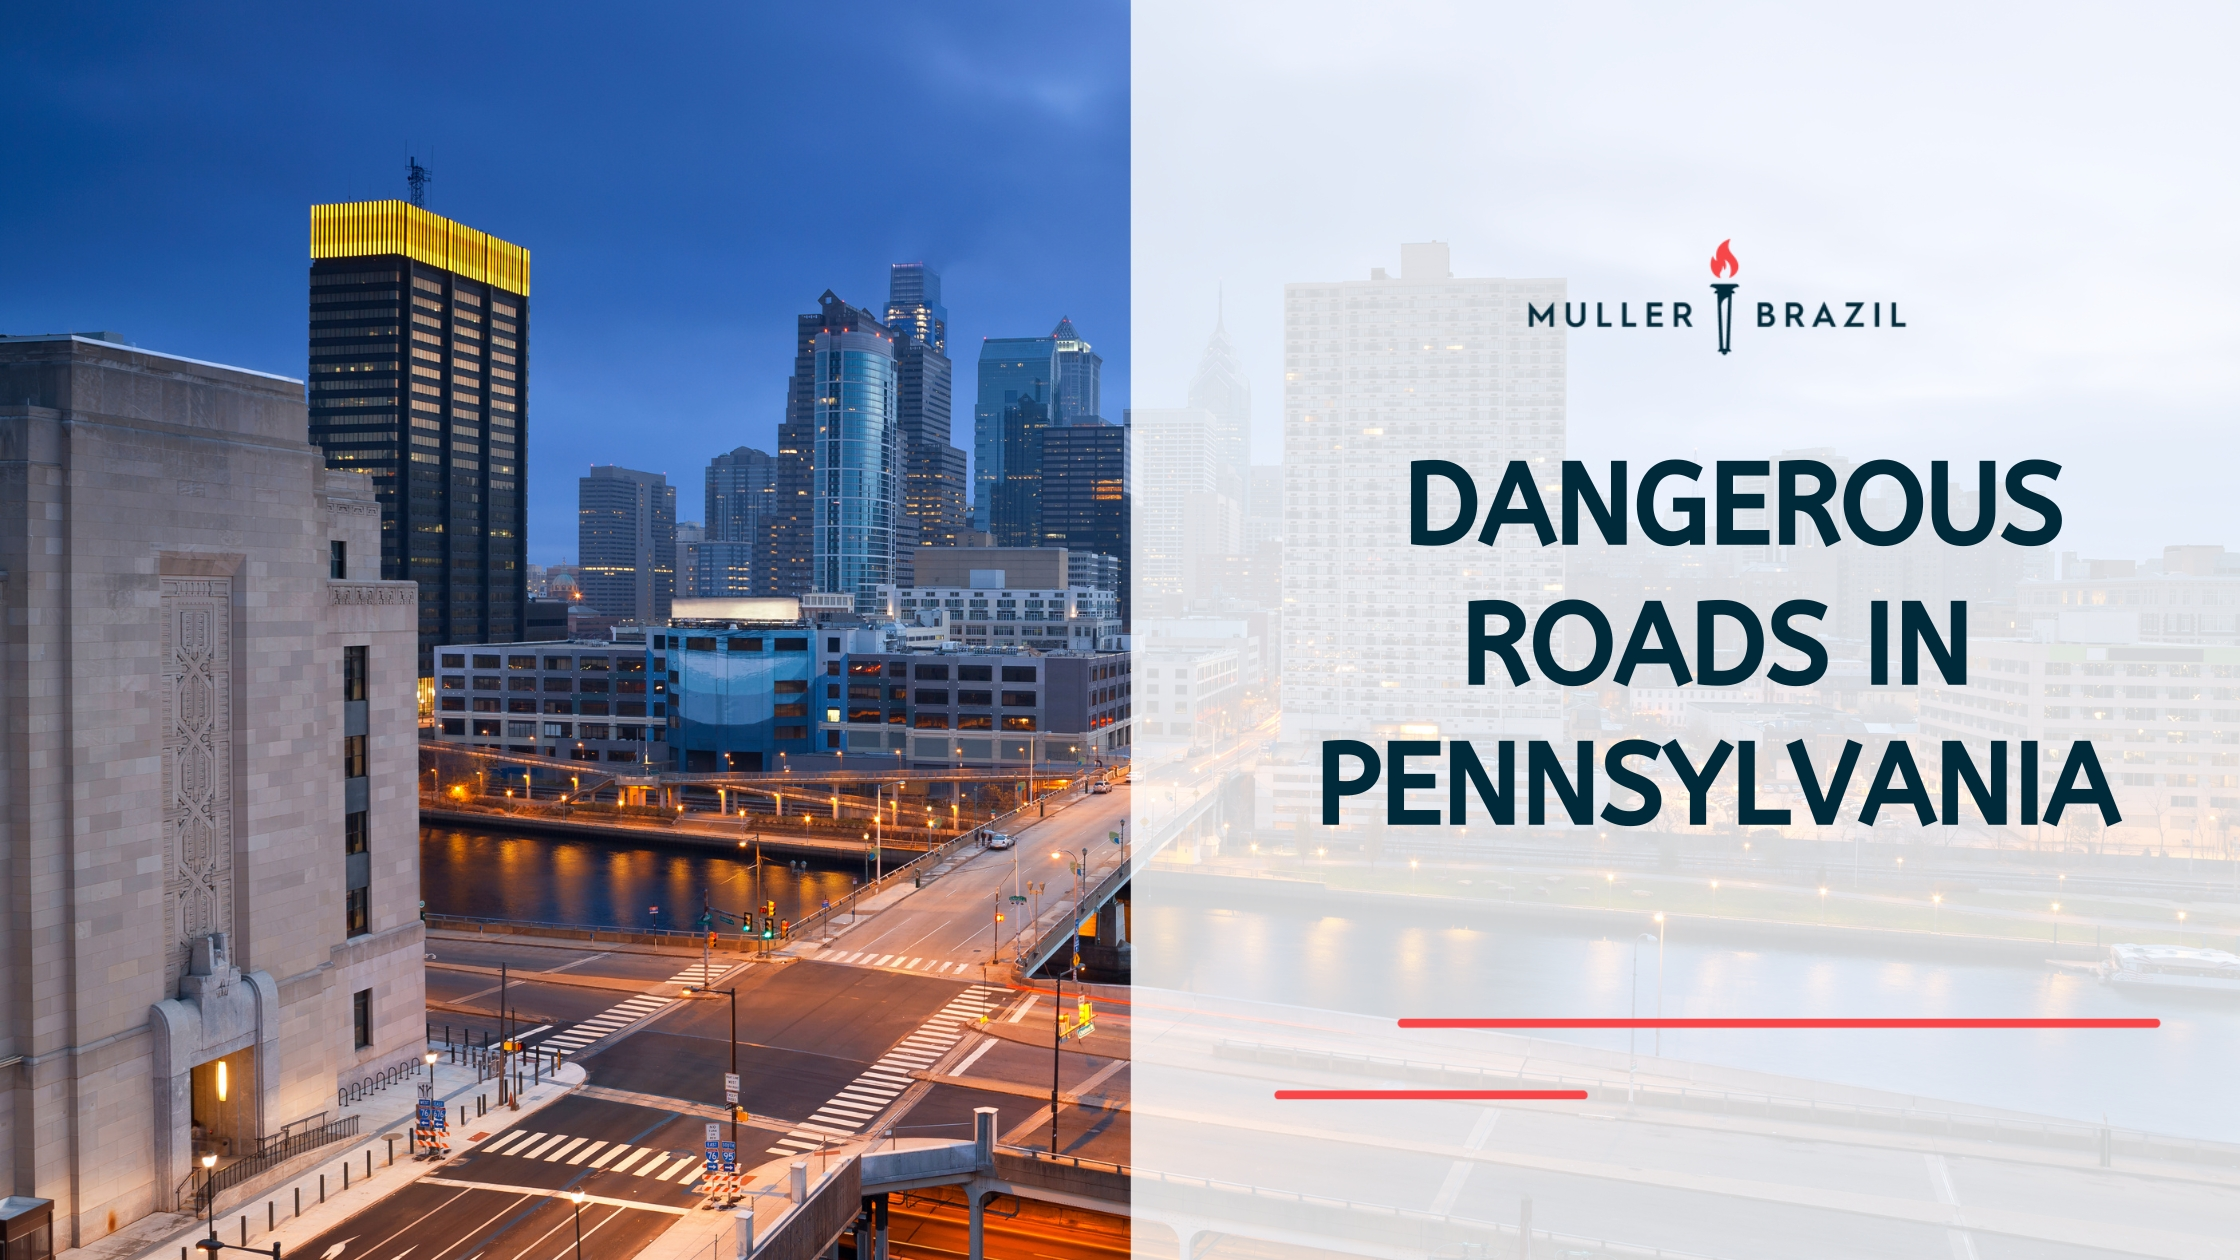 Featured image for blog postmost dangerous roads in Pennsylvania, Picture of Philadelphia skyline and streets